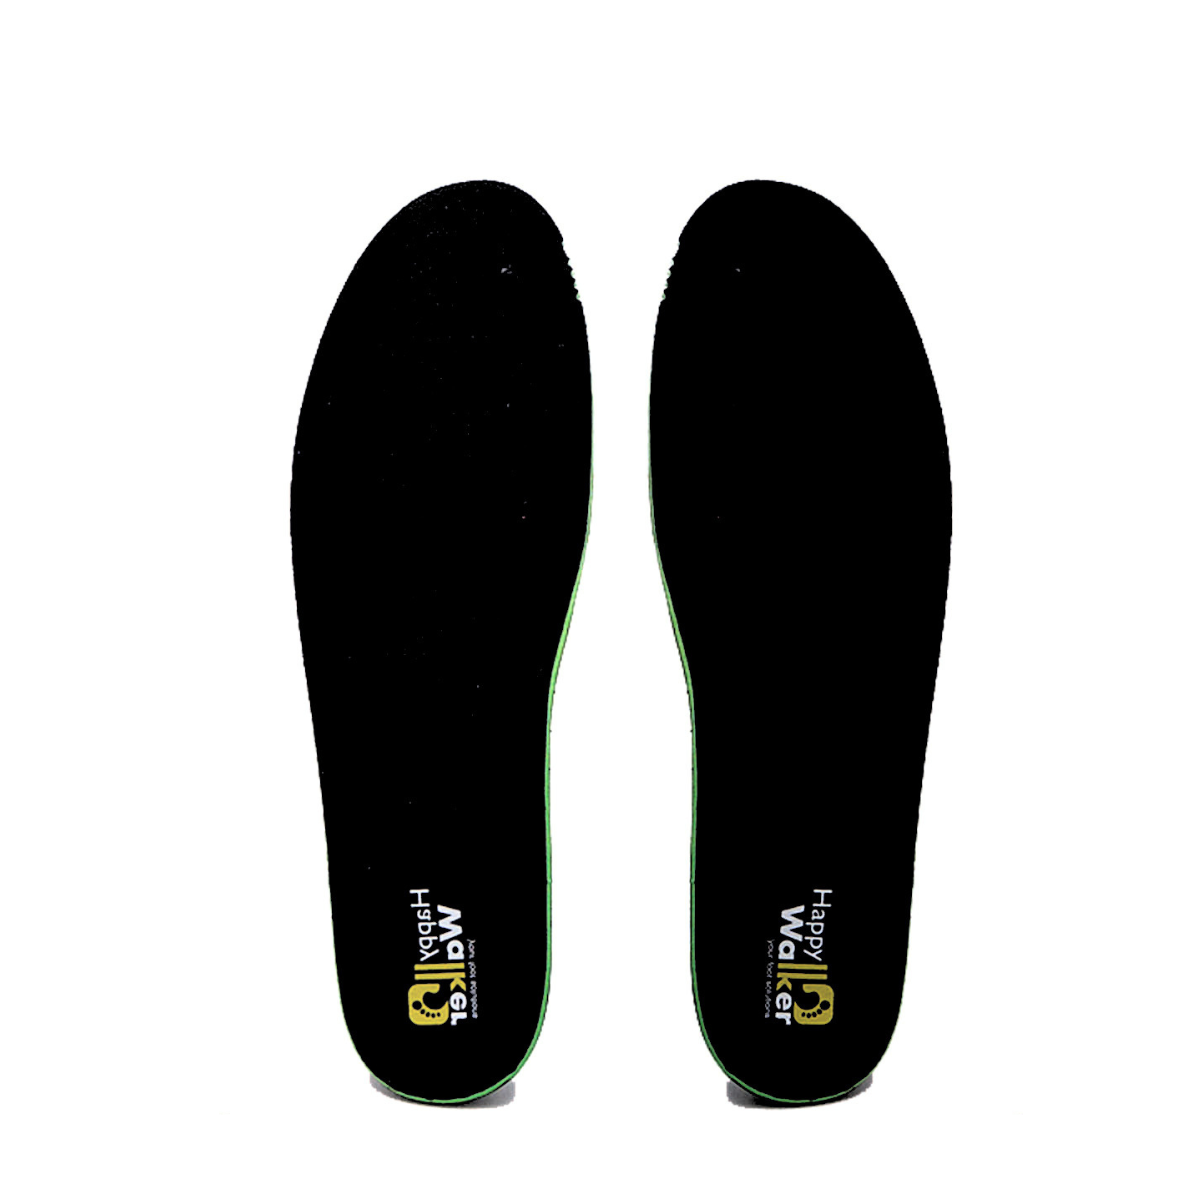 Orthopedic High Arch Insoles-Black